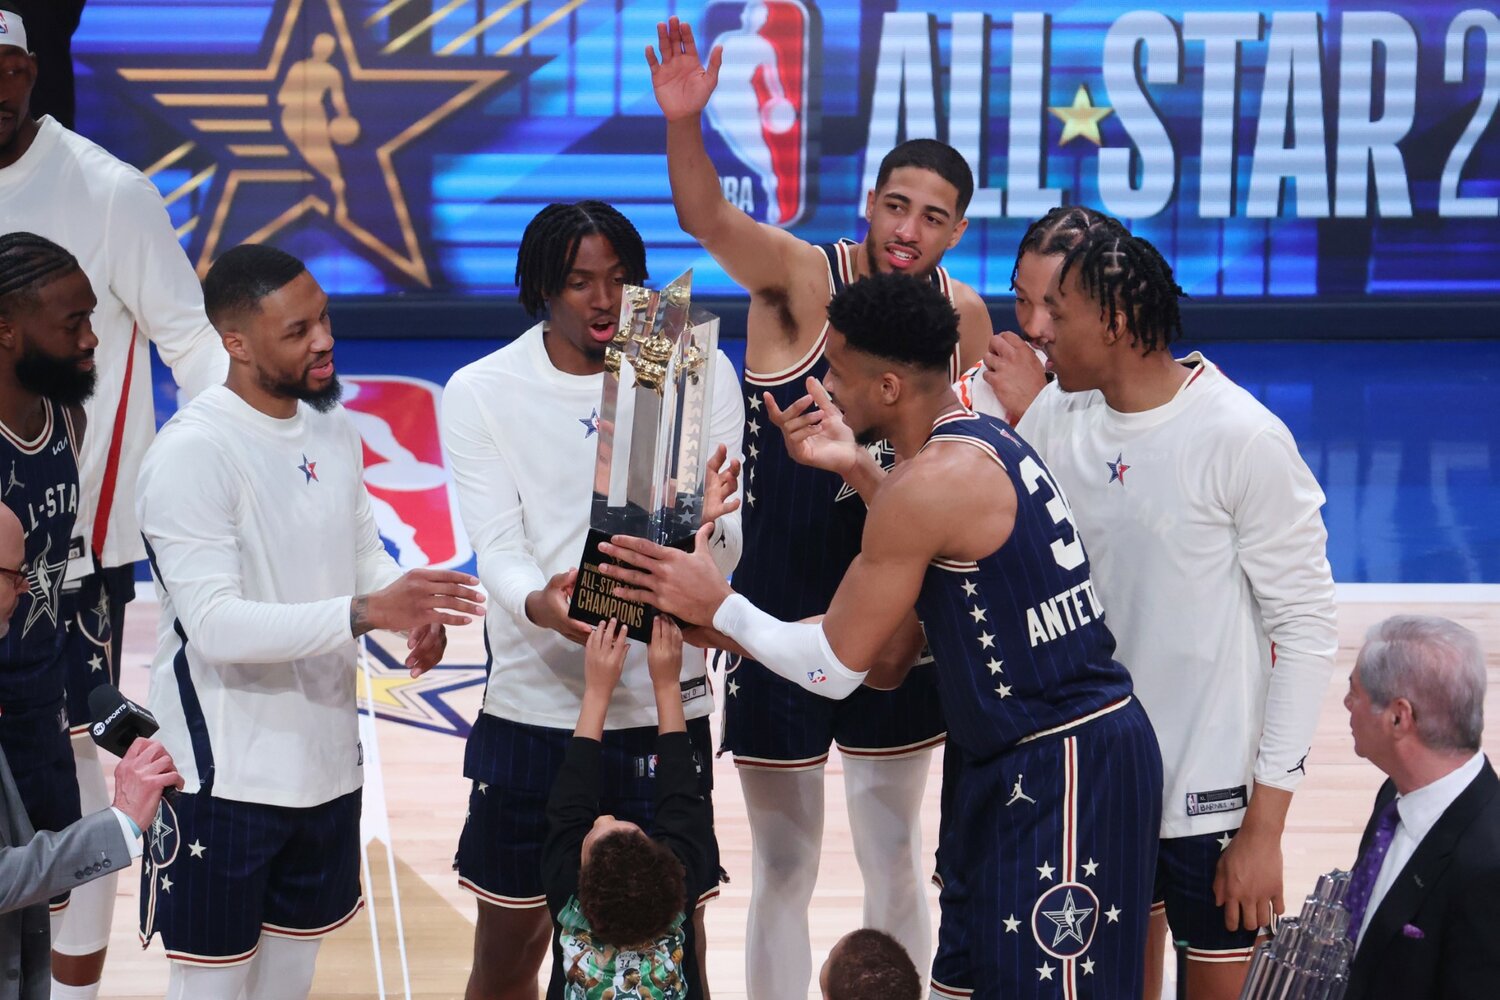 The Eastern Conference All-Star team were winners taking down the Western Conference All-Stars 211-186.